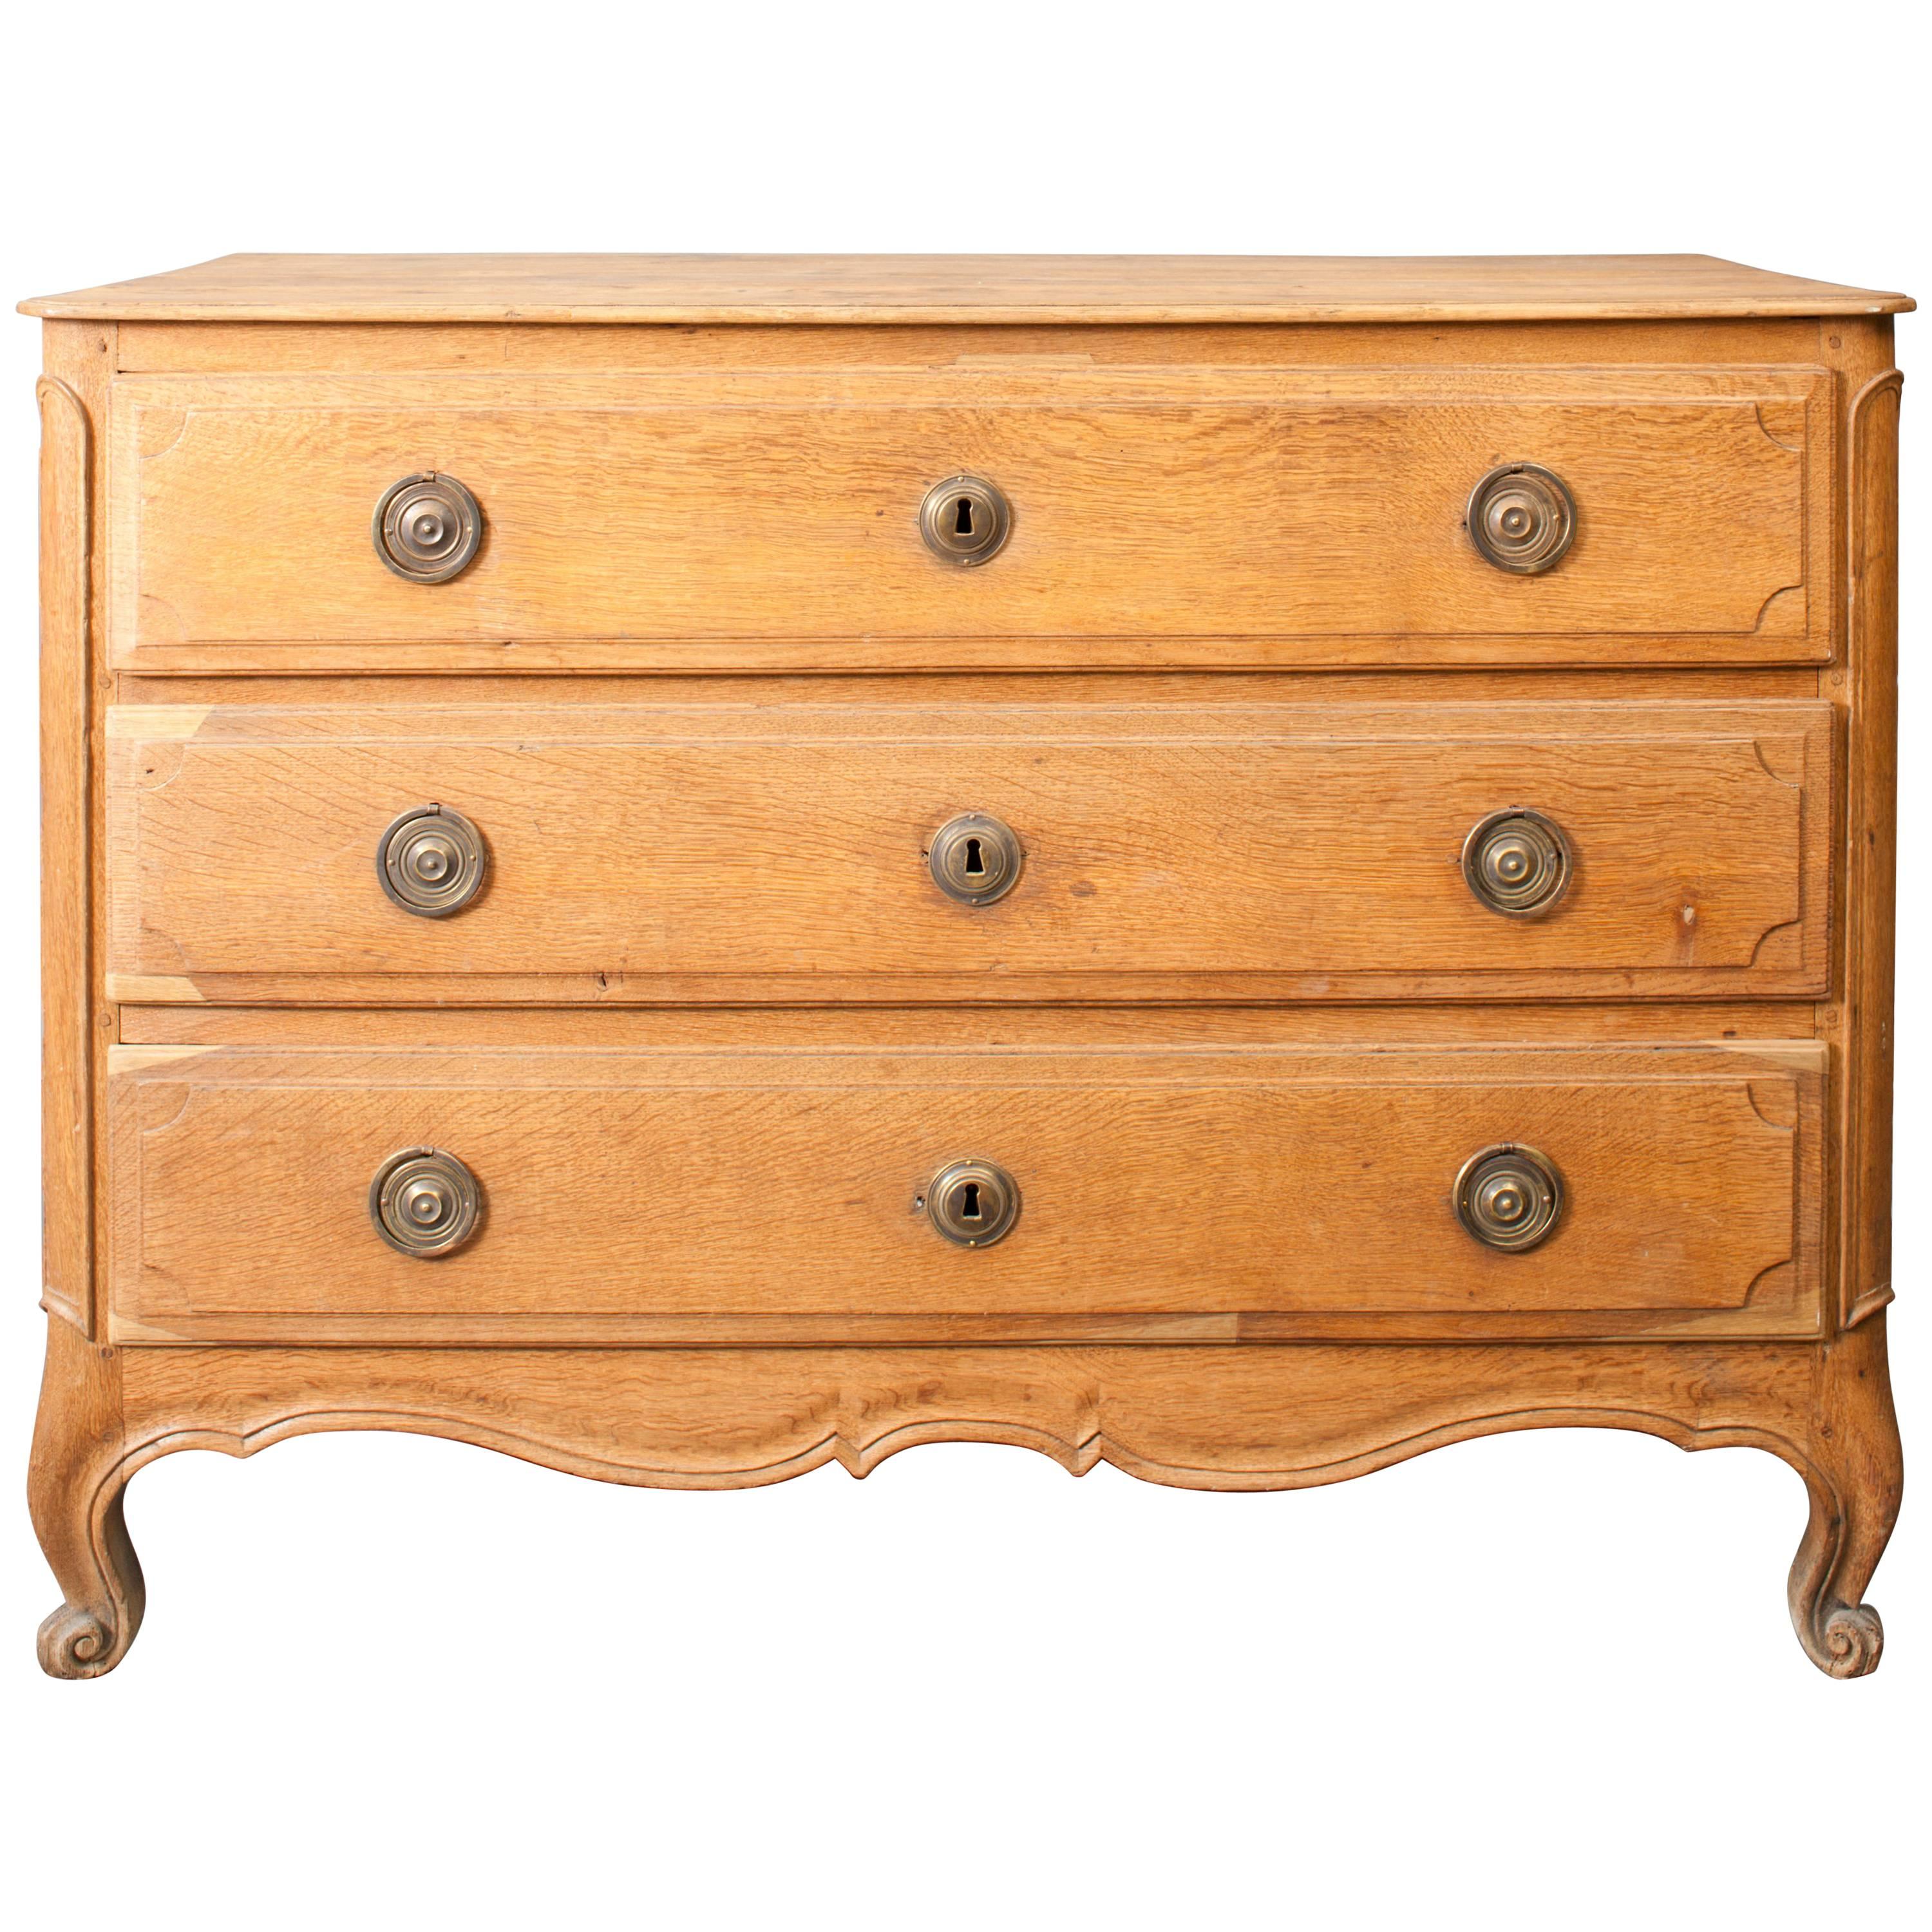 Late 19th Century Chest of Drawers in the Style of Louis XV Made of Oak & Brass